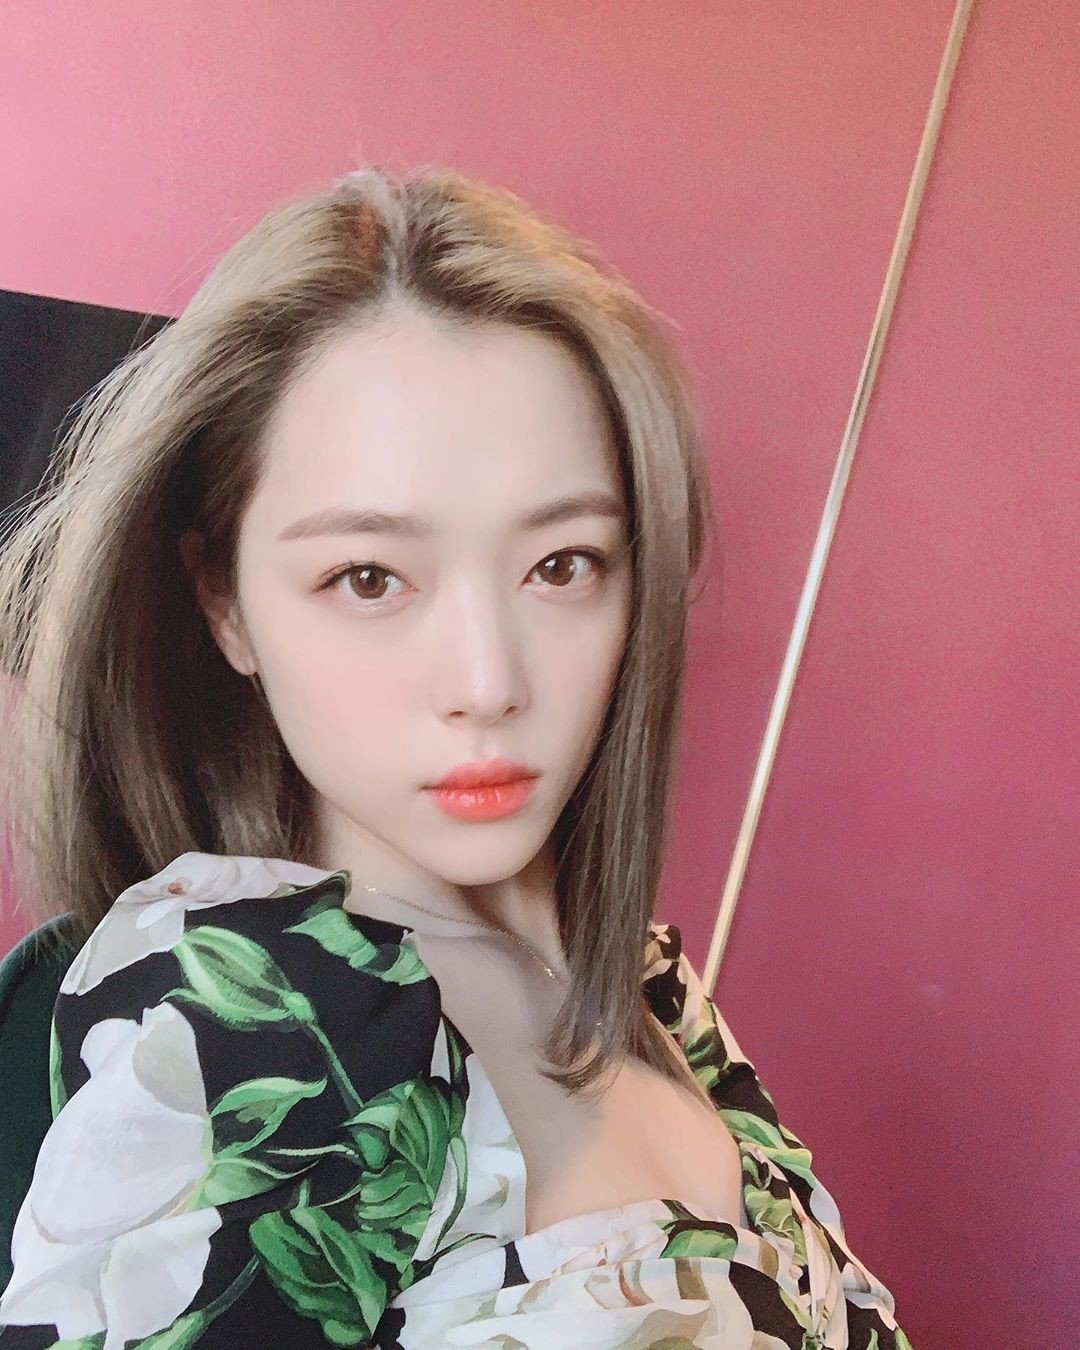 K-pop star Sulli’s sad, sudden death has prompted polarised reactions, igniting debate about the scrutiny faced by performers in Korea’s entertainment industry. Photo: Instagram